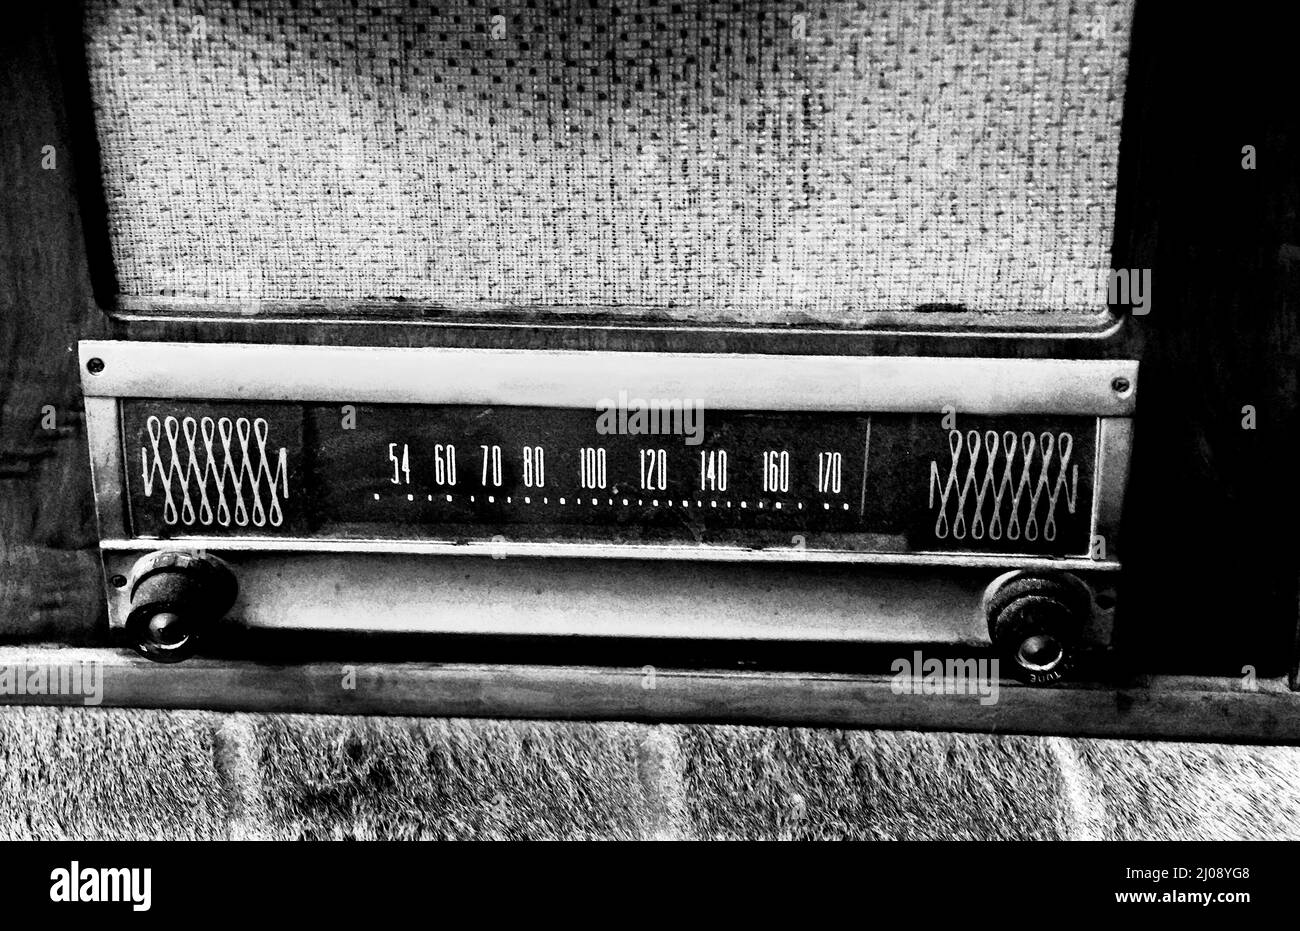 Tuner on this antique radio is turned to a channel over 170. Artistic black  and white rendering of radio and speaker with tunning dials Stock Photo -  Alamy